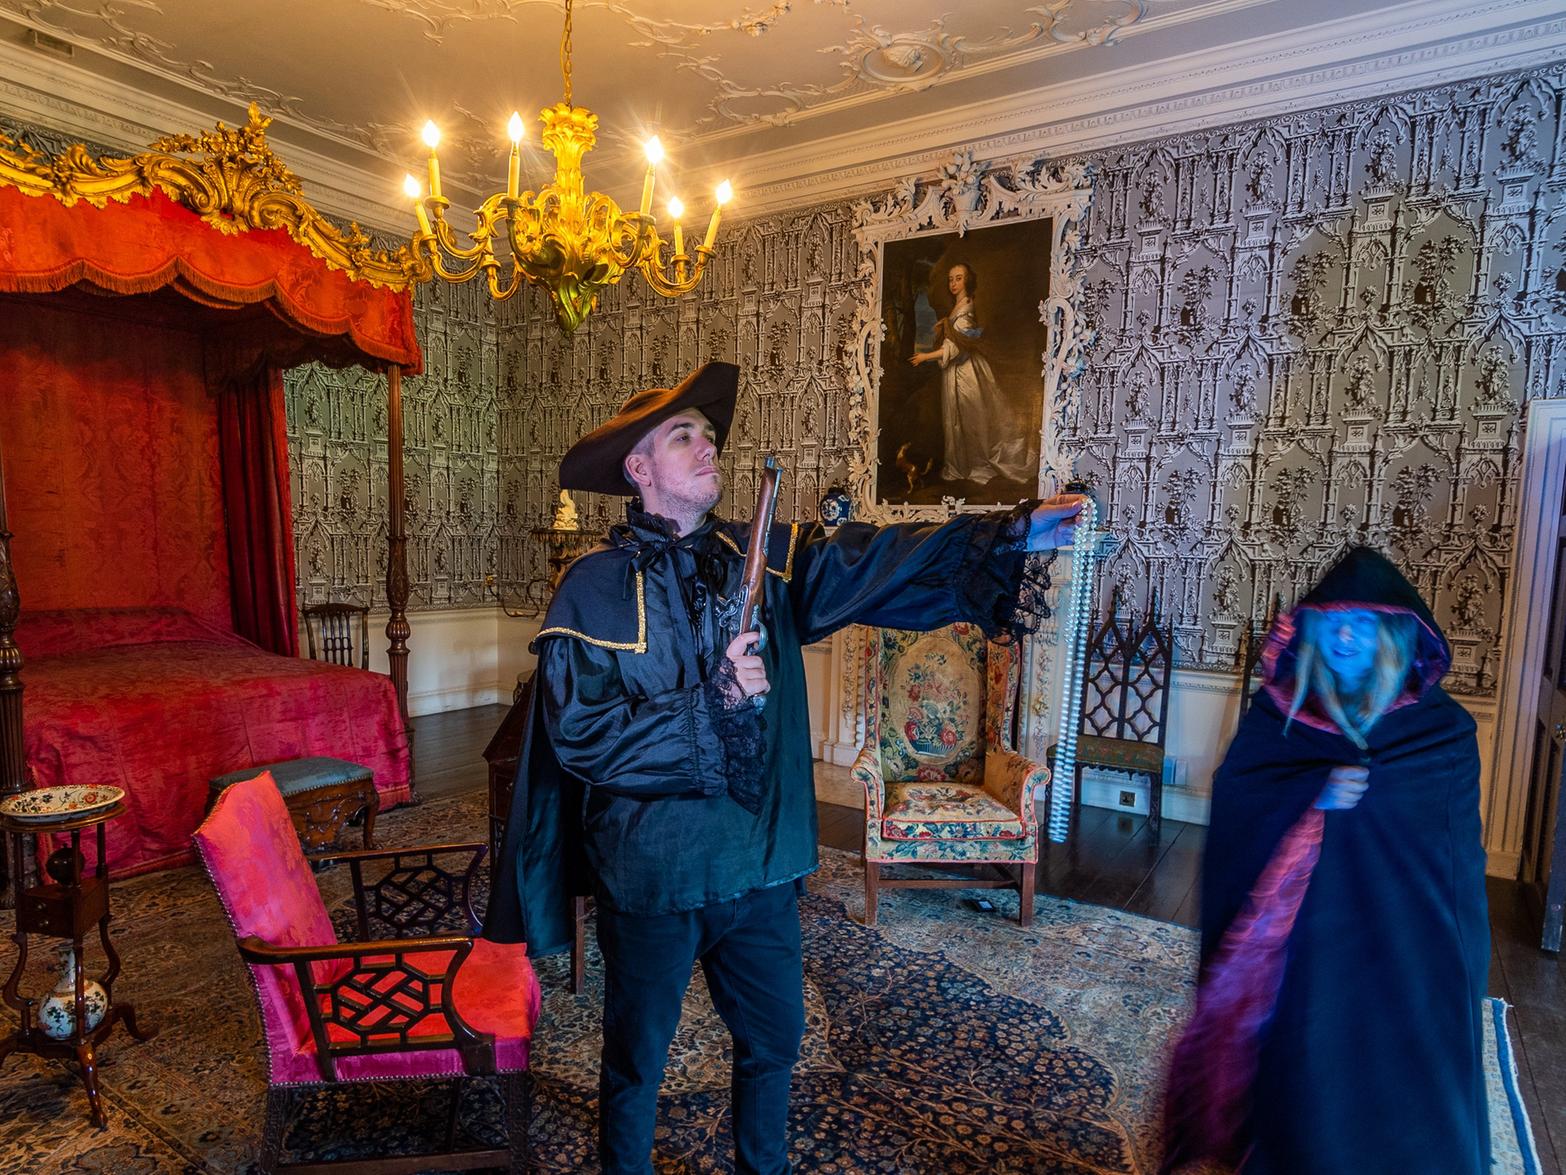 Perhaps Leeds' most famous ghost - the Blue Lady of Temple Newsam starved herself to death after she lost her precious pearls. She is said to haunt the estate today, slamming doors and screaming for her lost pearls.